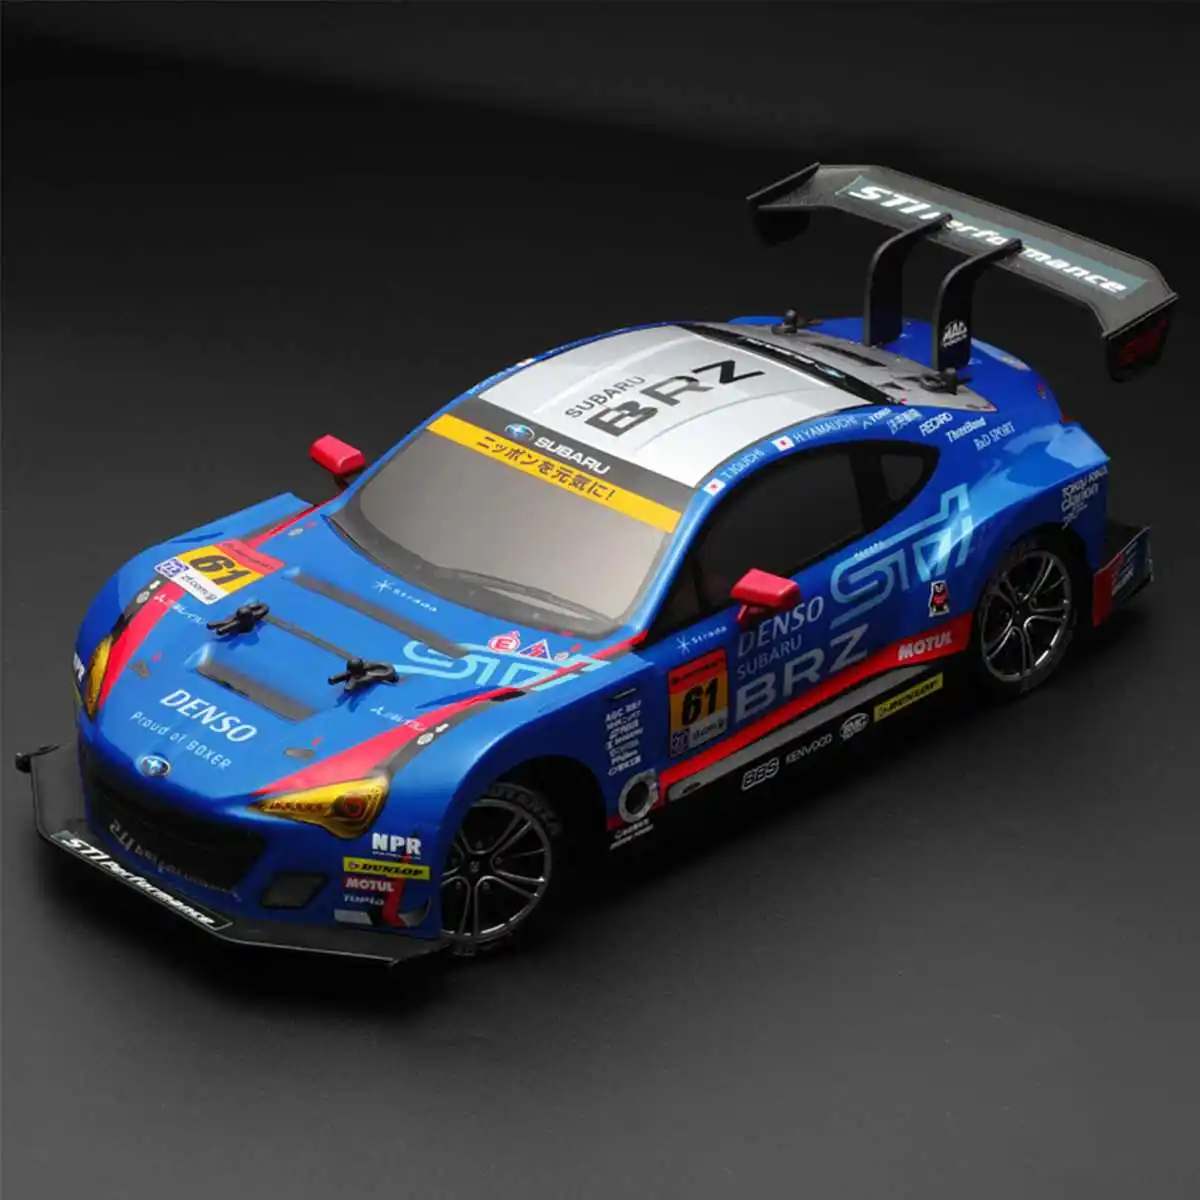 High Toys 58km/h Championship Vehicle Speed Hobby 1:16 Electronic Car Rally Remote Racing Drift Car Control enlarge